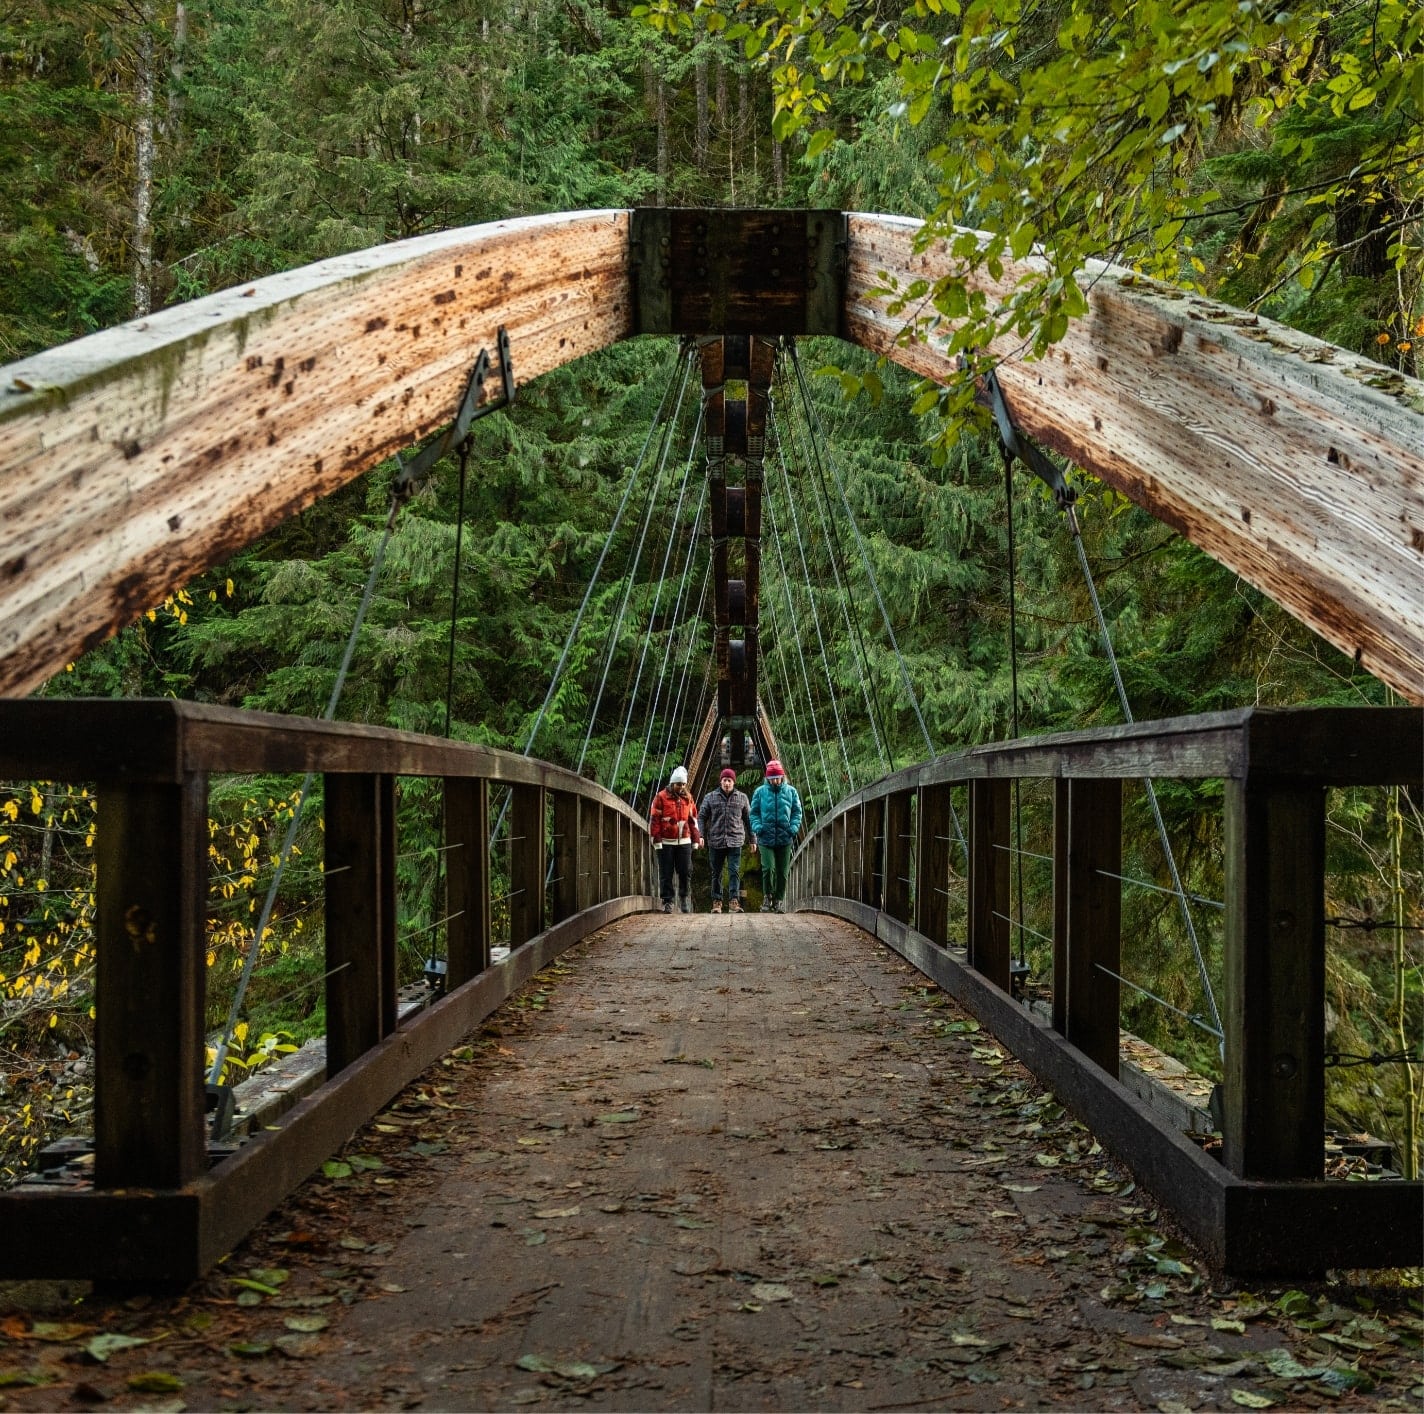 Click to read more about the Kachess Ridge Trail.